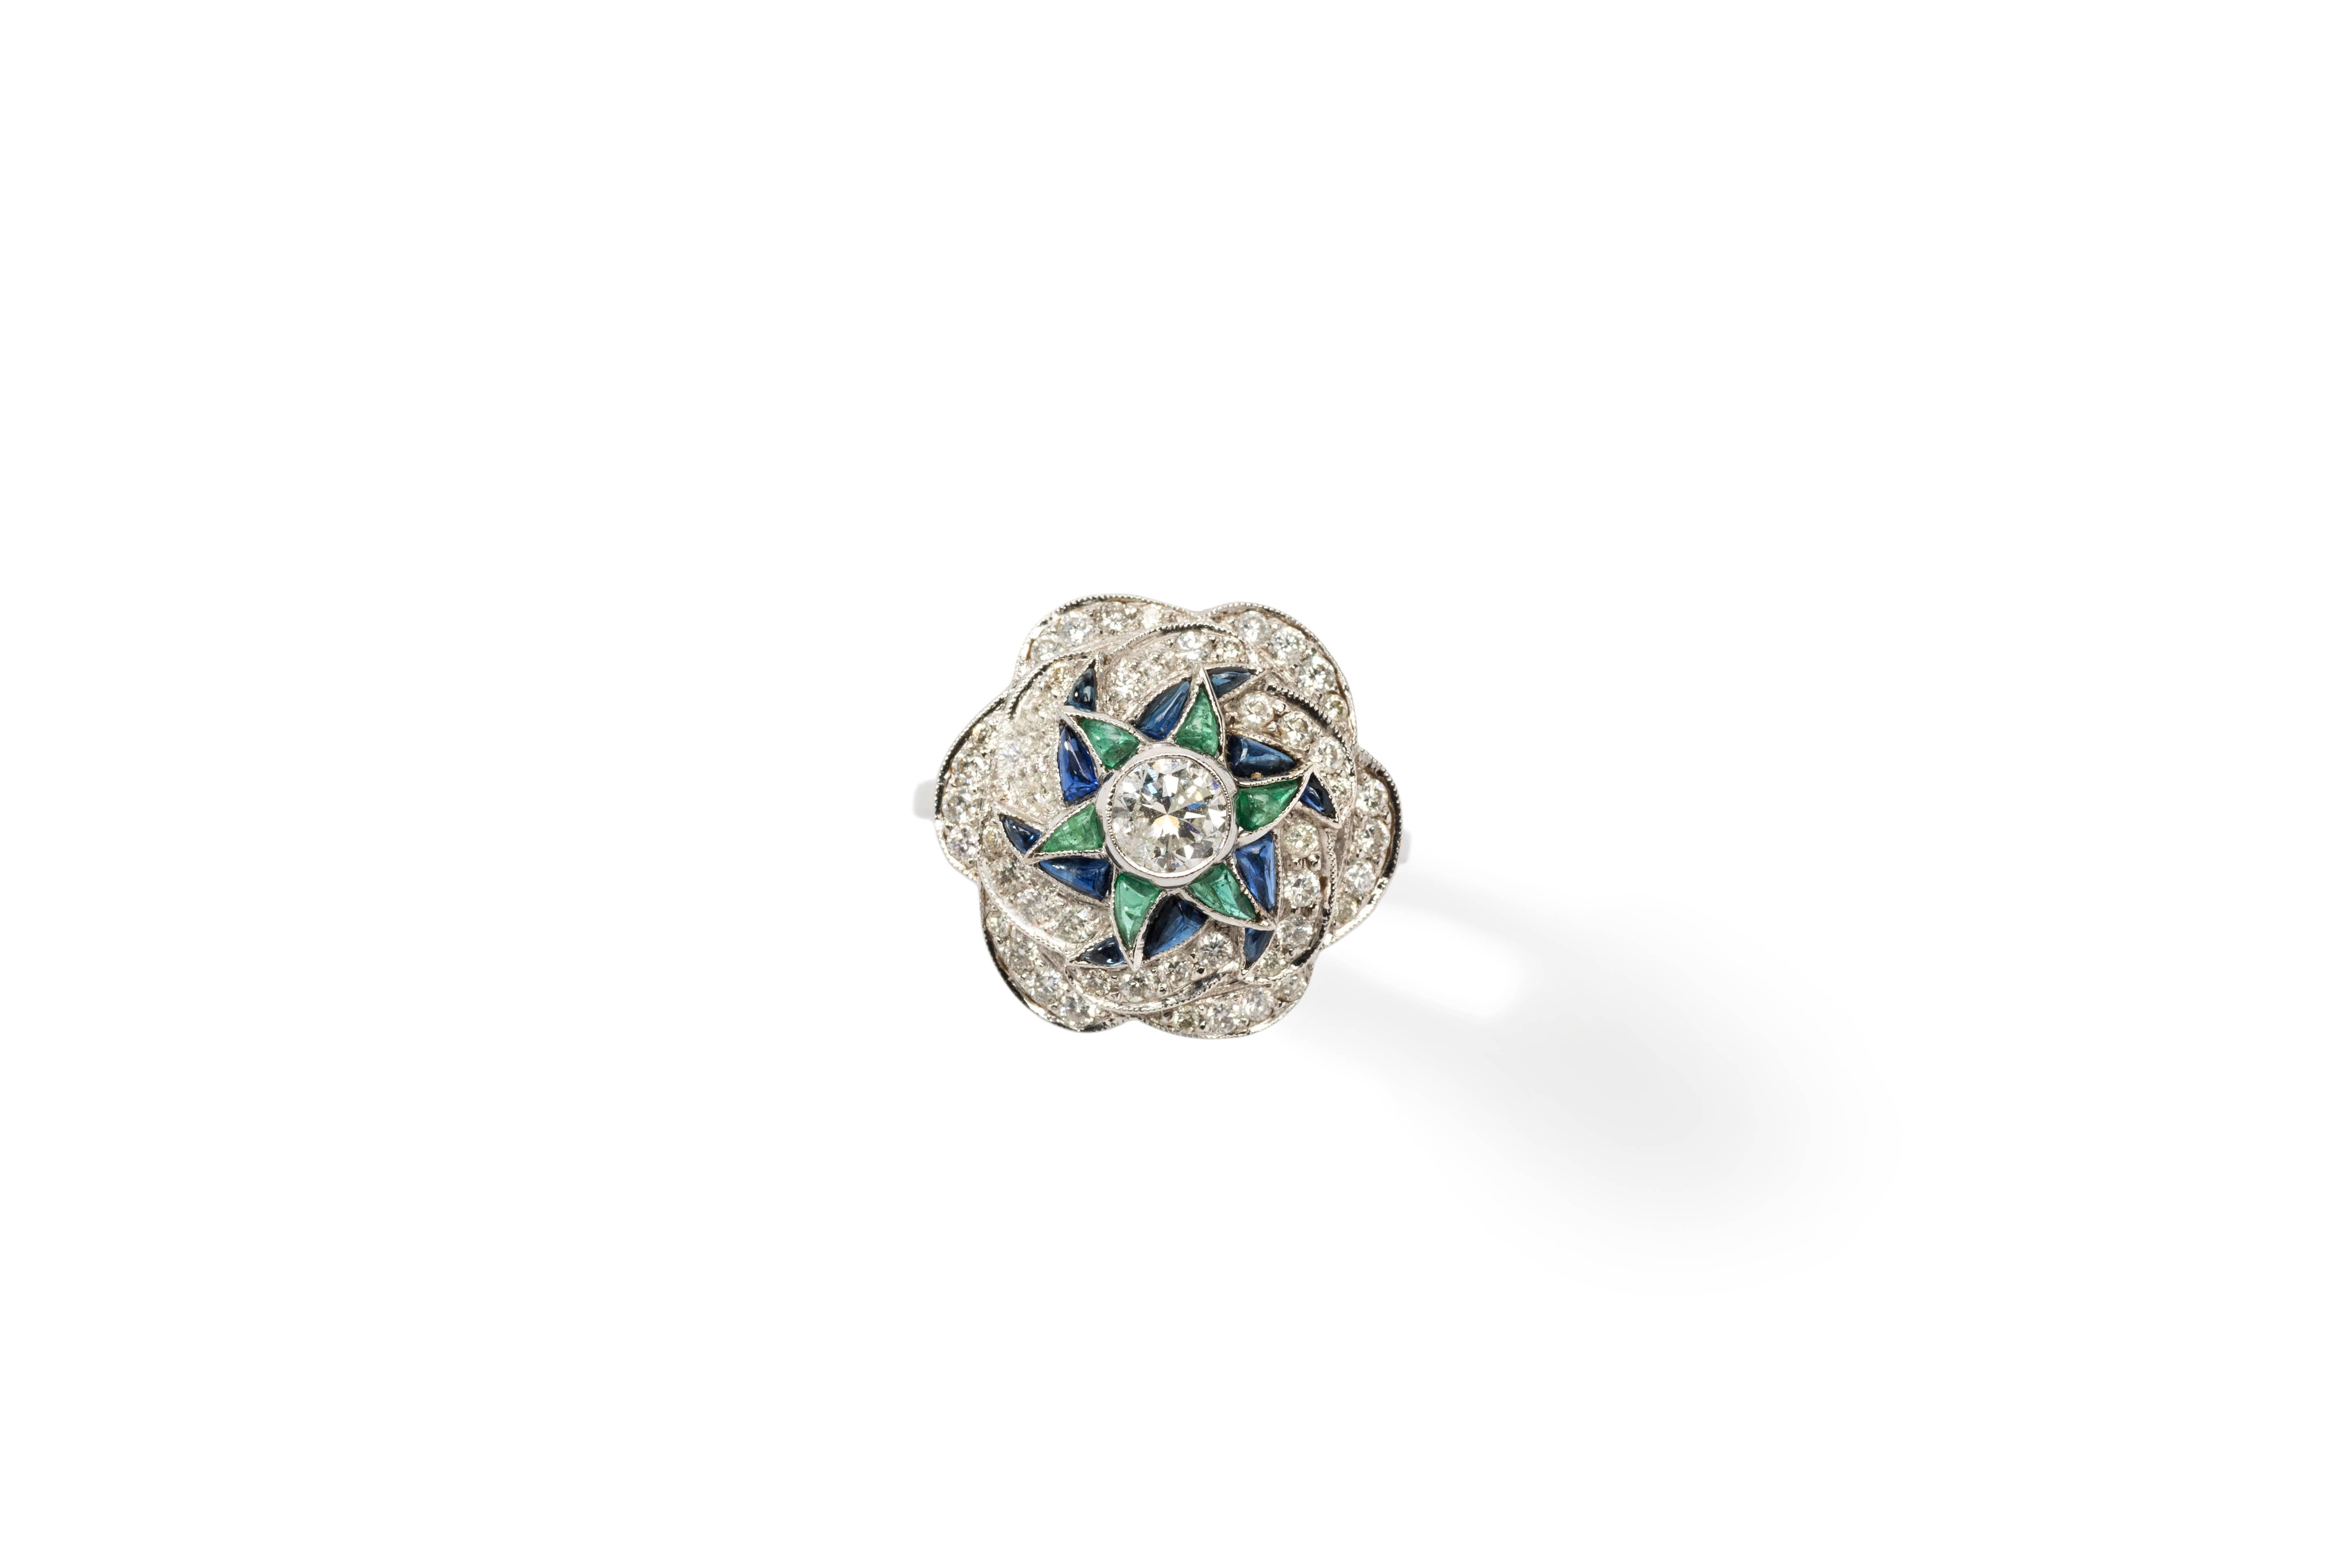 Europe, late 20th century, Art Déco style. Flower shape. Set with 51 brilliant-cut diamonds weighing circa 1.25 ct. Central brilliant-cut diamond circa 0.40 ct. clarity: VVS2, color: fancy light yellow. 12 sapphires weighing circa 0.50 ct. and 6